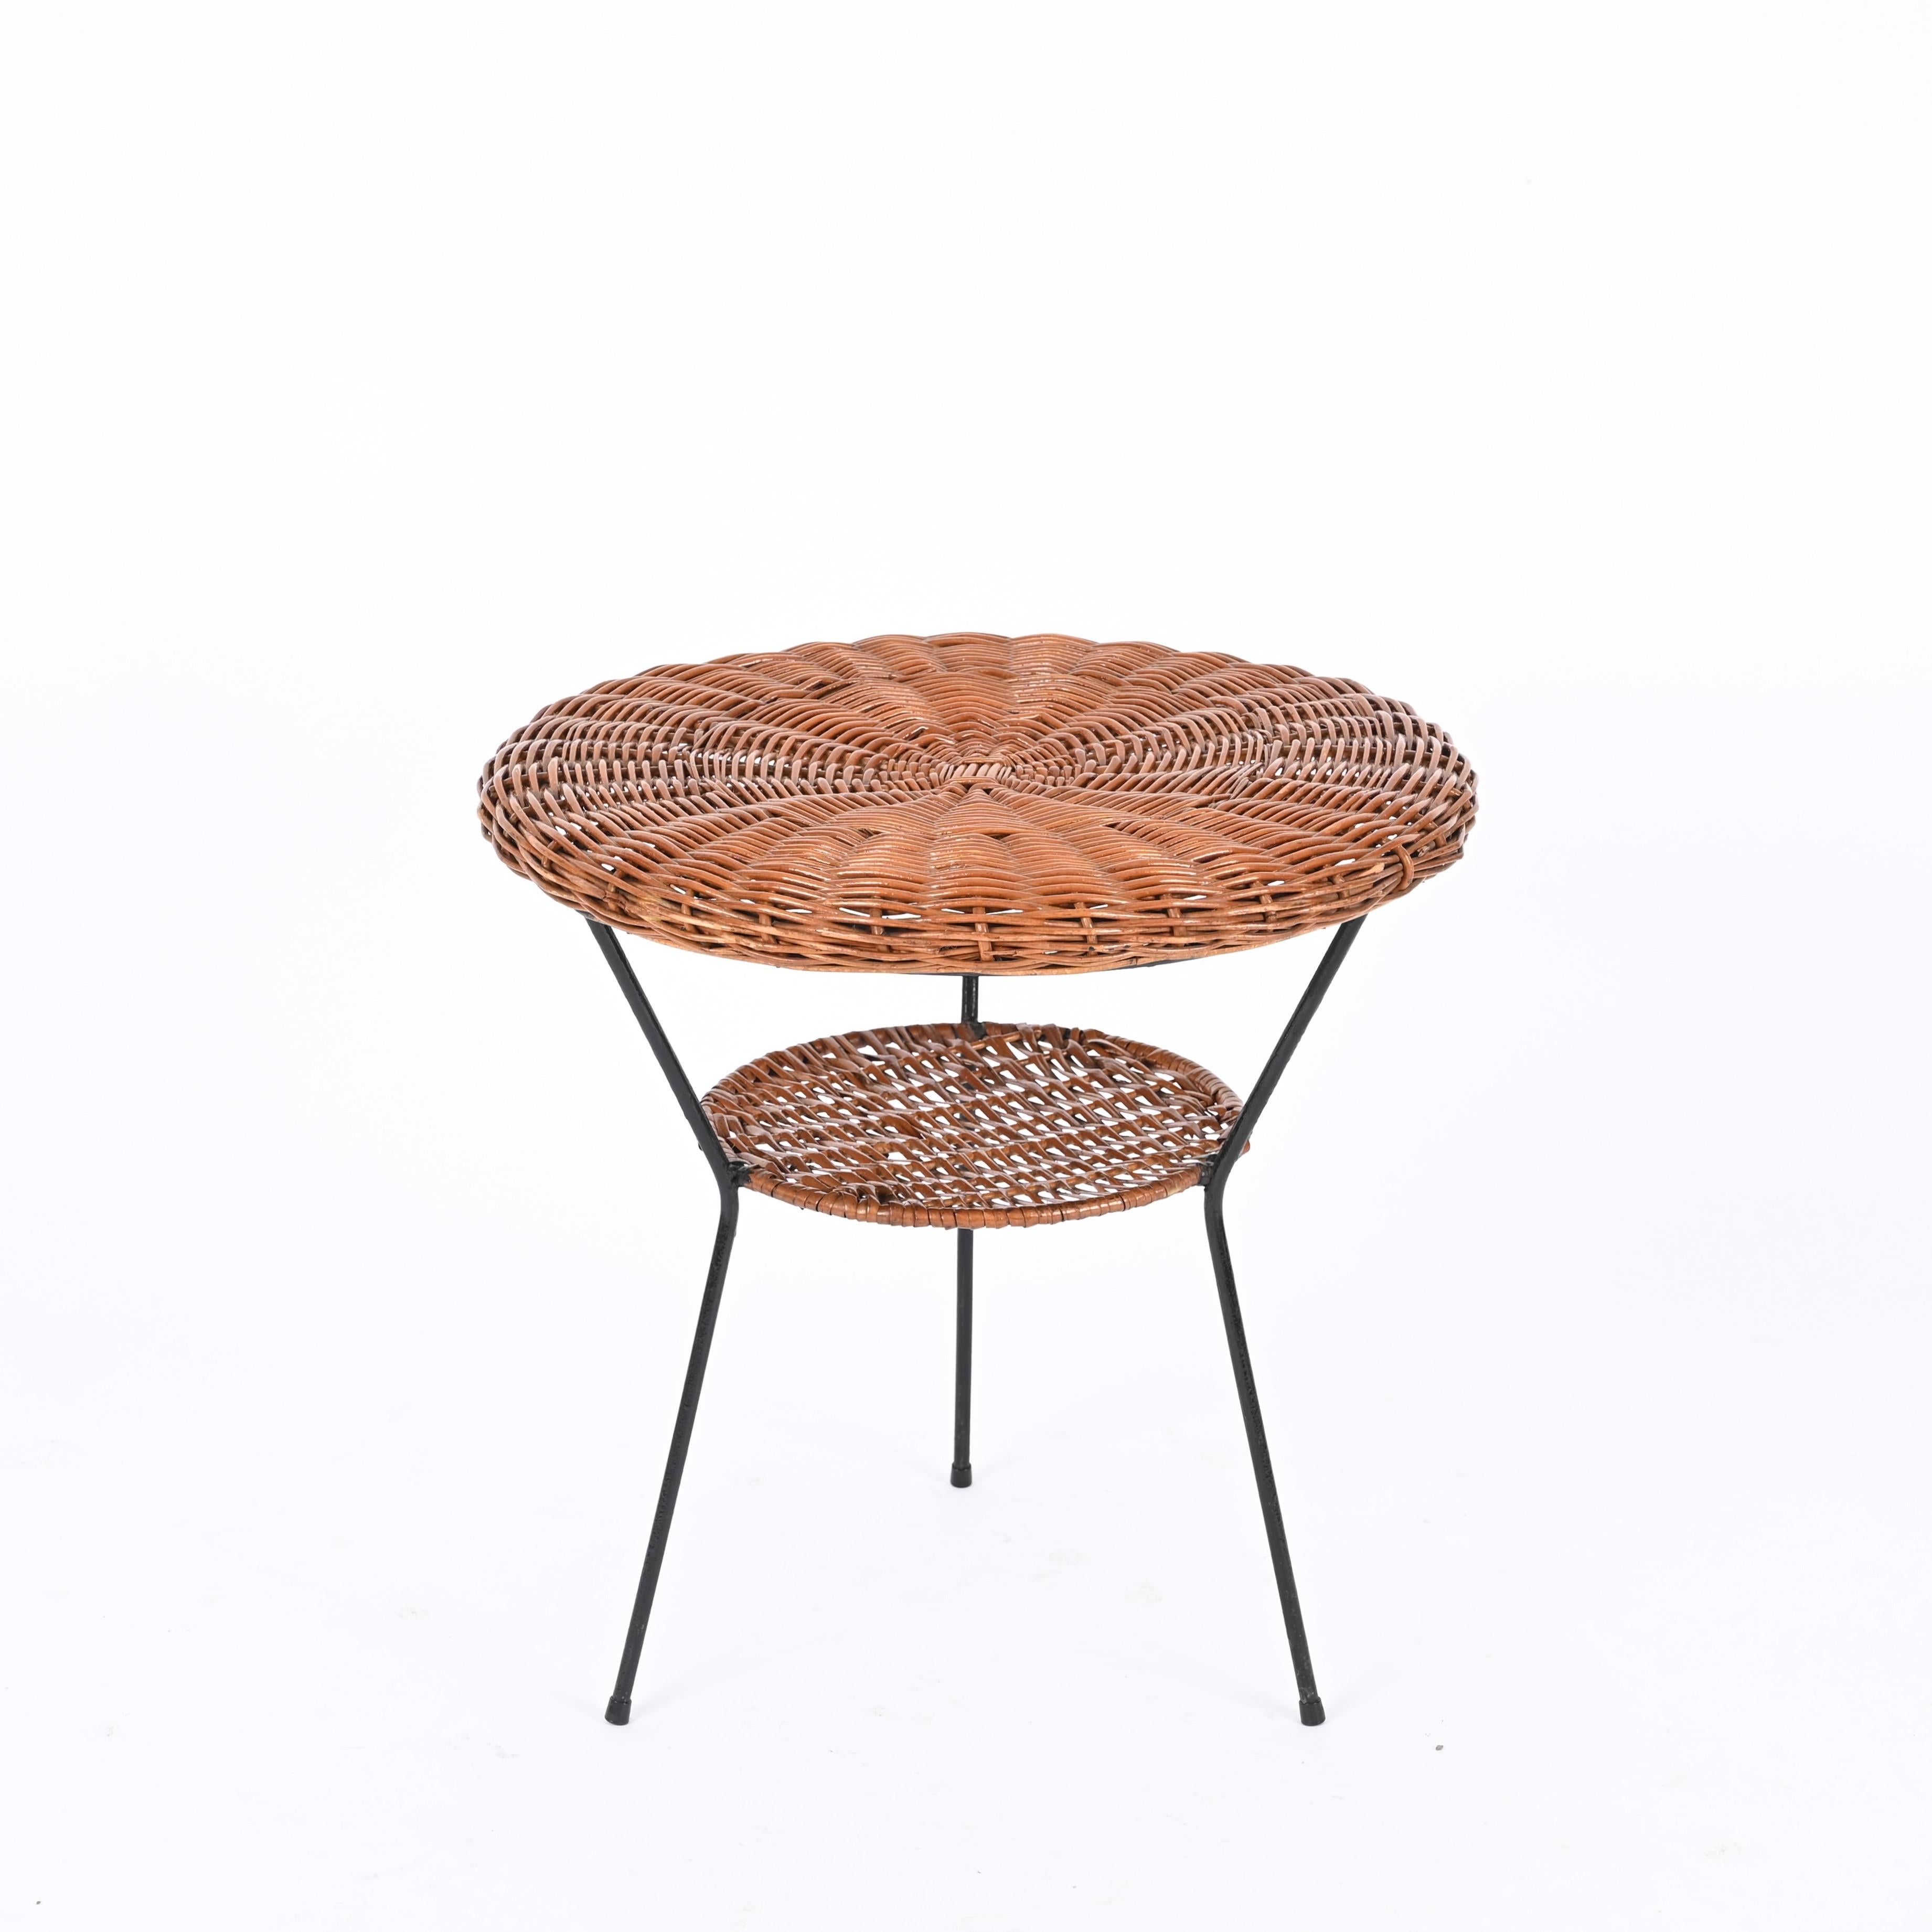 Mid-20th Century Woven Rattan, Wicker and Iron Two-Tier Round Coffee Table, Matégot, France 1960s For Sale